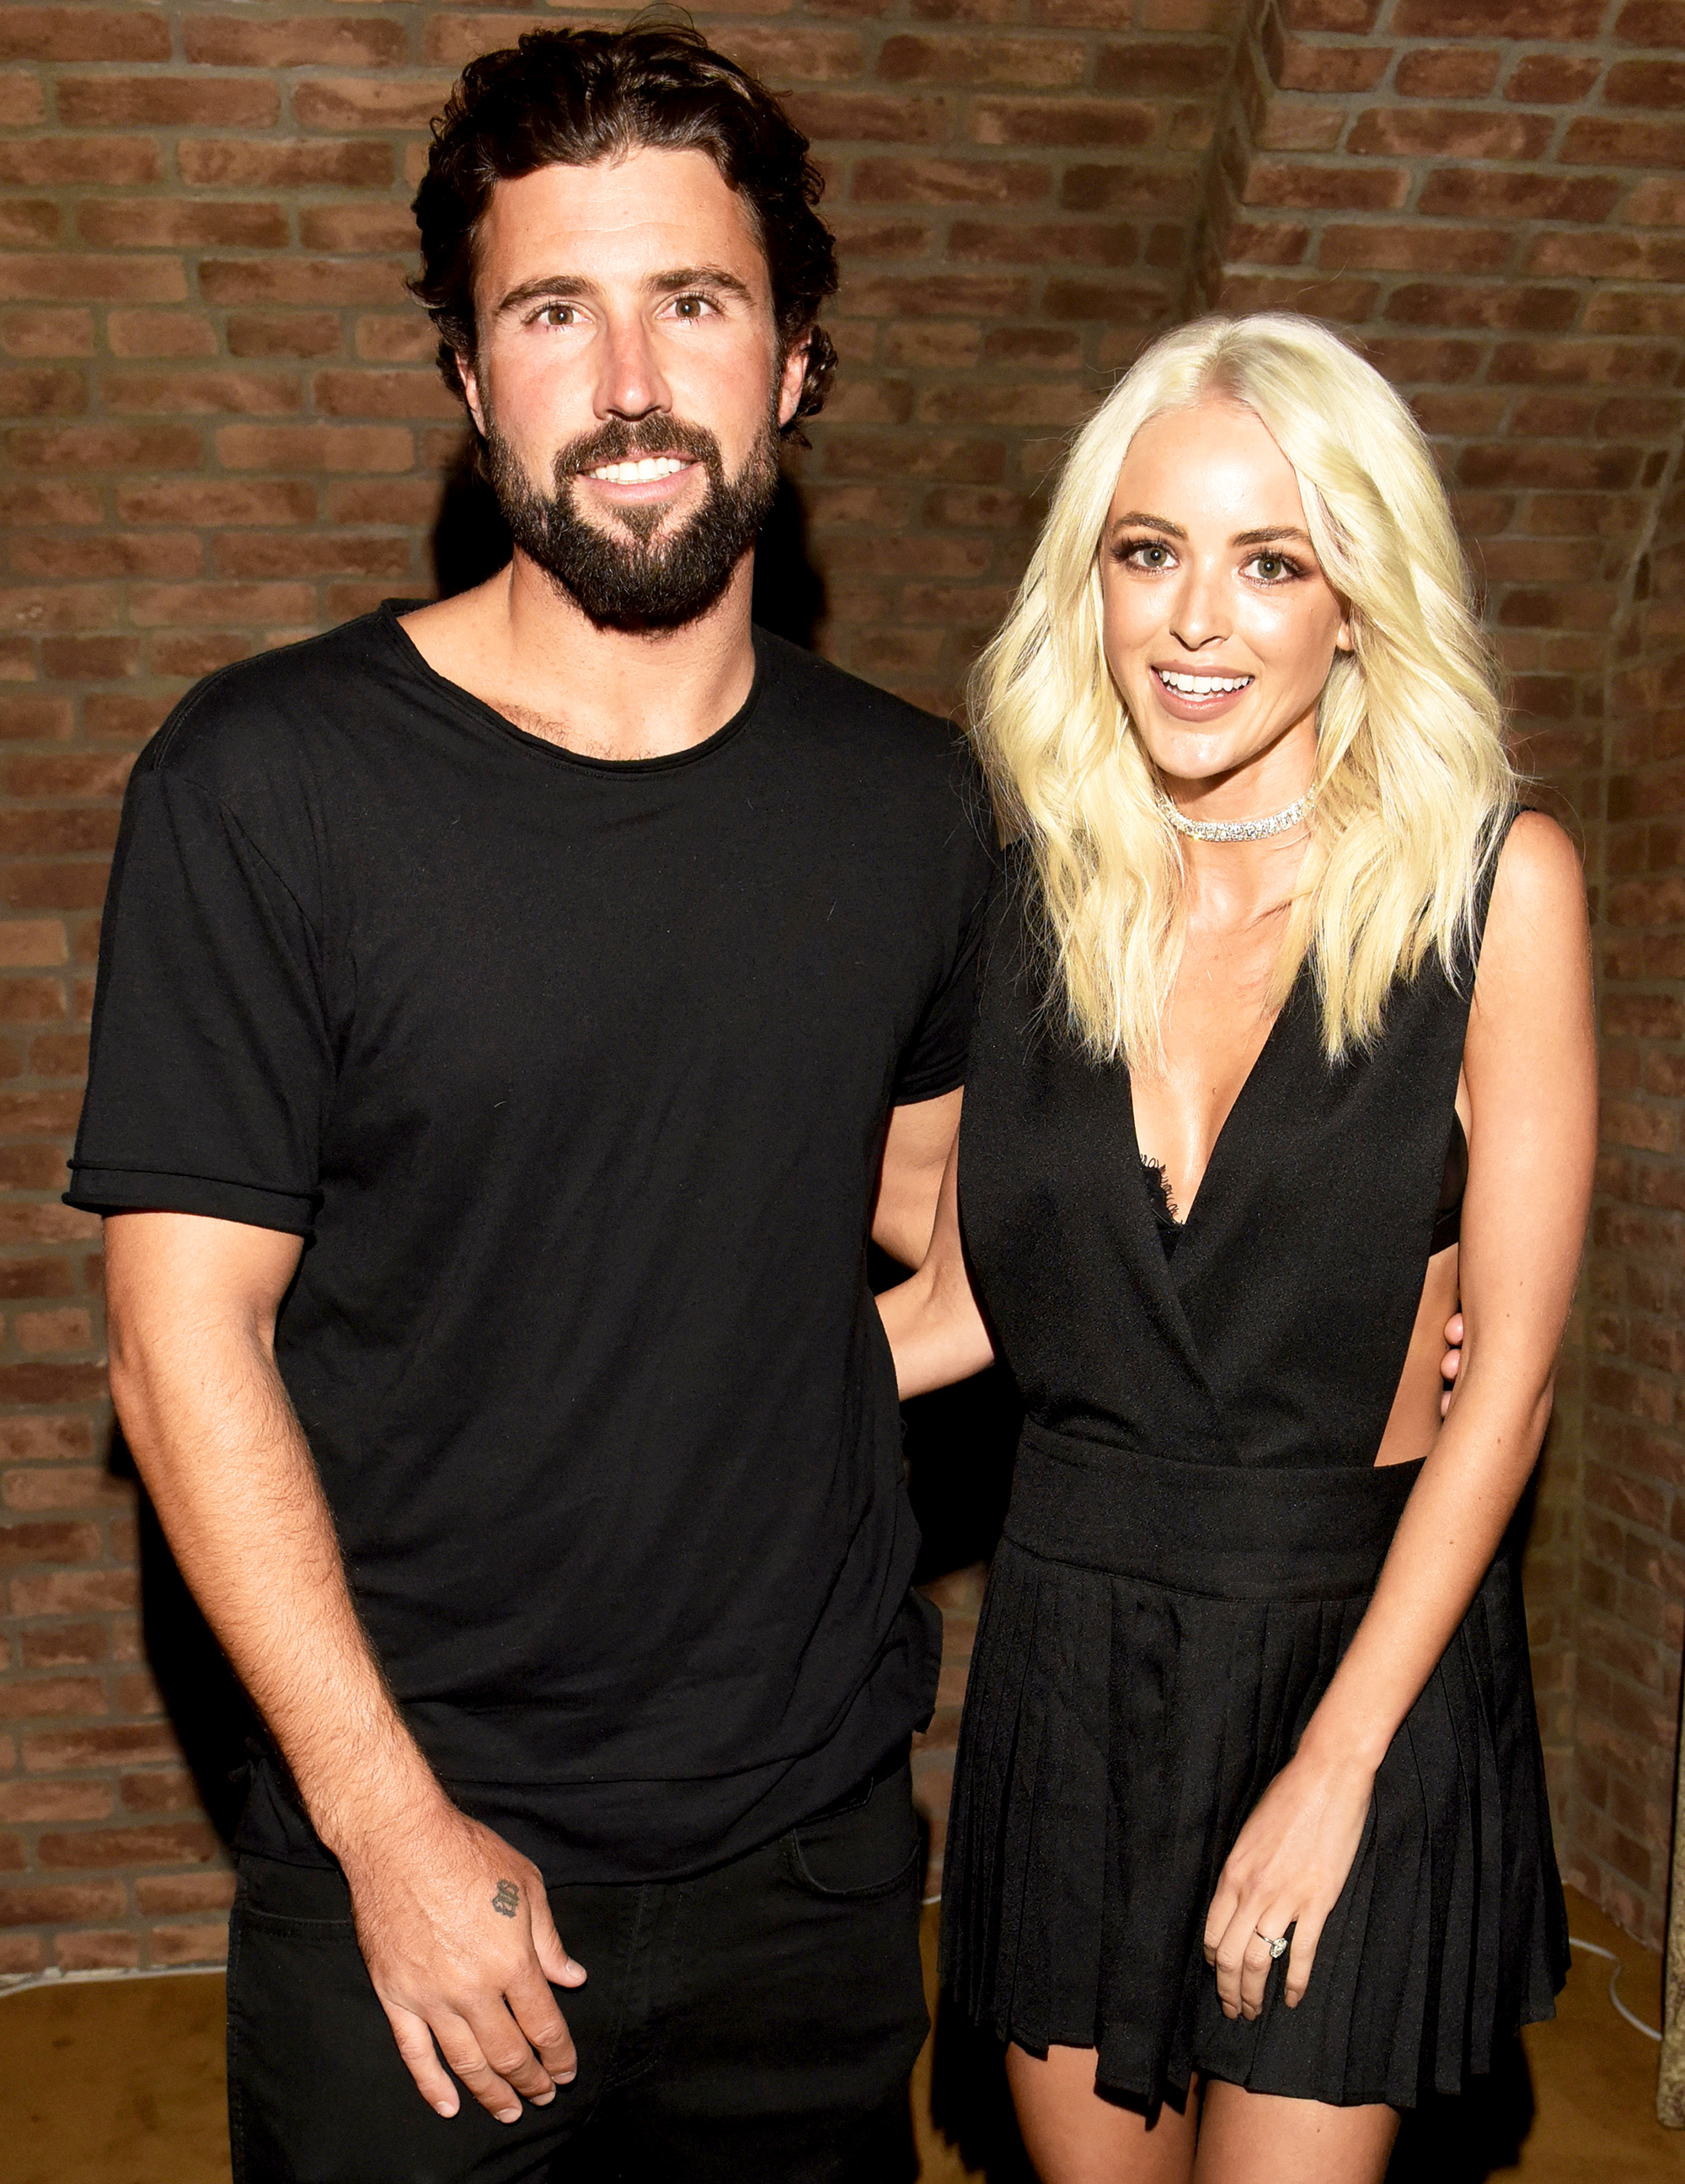 The Hills Brody Jenner Marries Kaitlynn Carter in Indonesia image